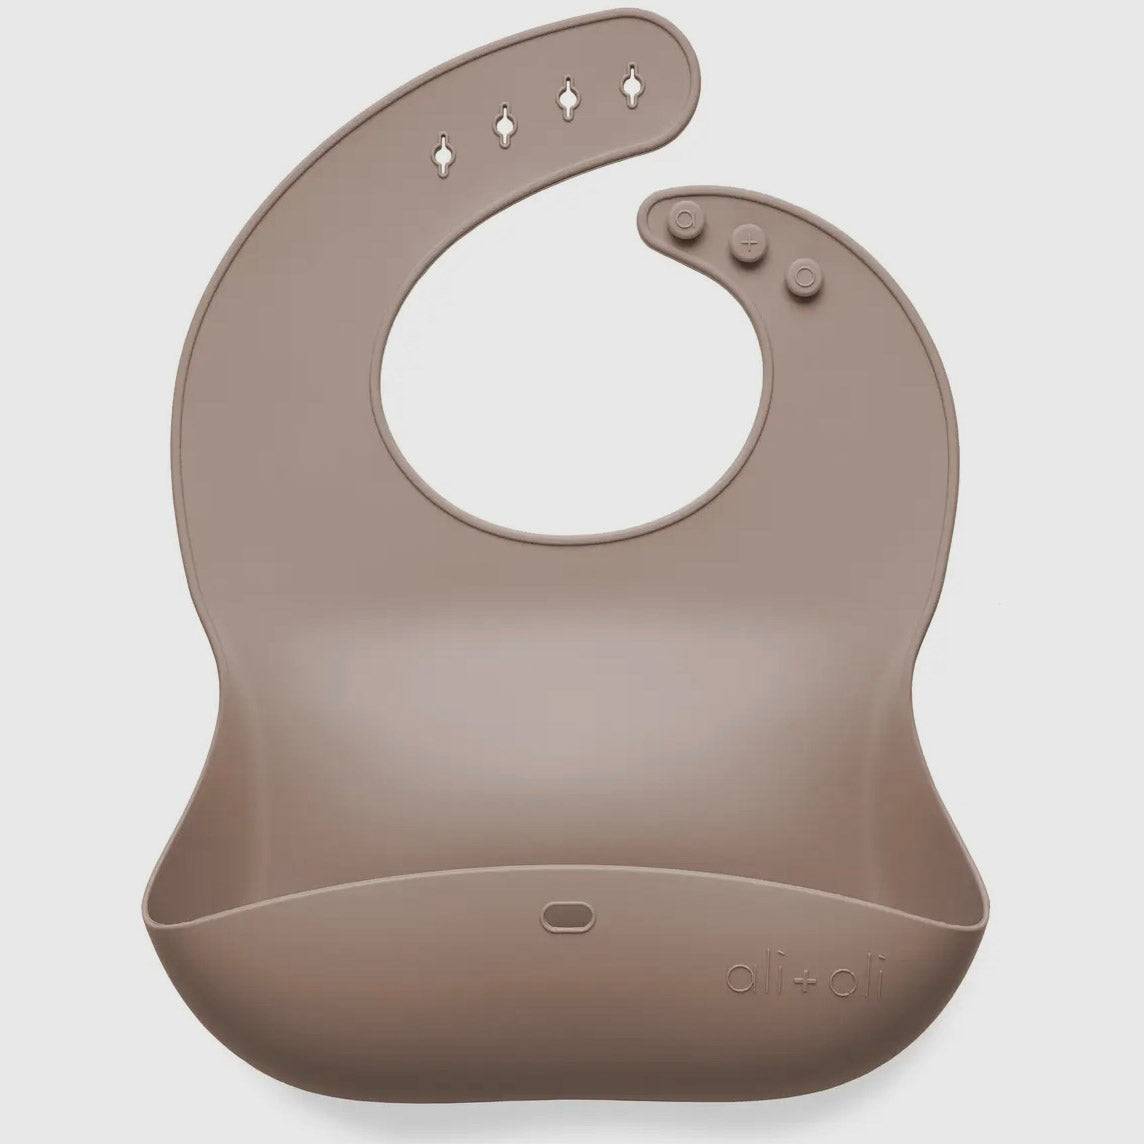 Ali + Oli, Silicone Baby Bib Roll Up & Stay Closed- Taupe